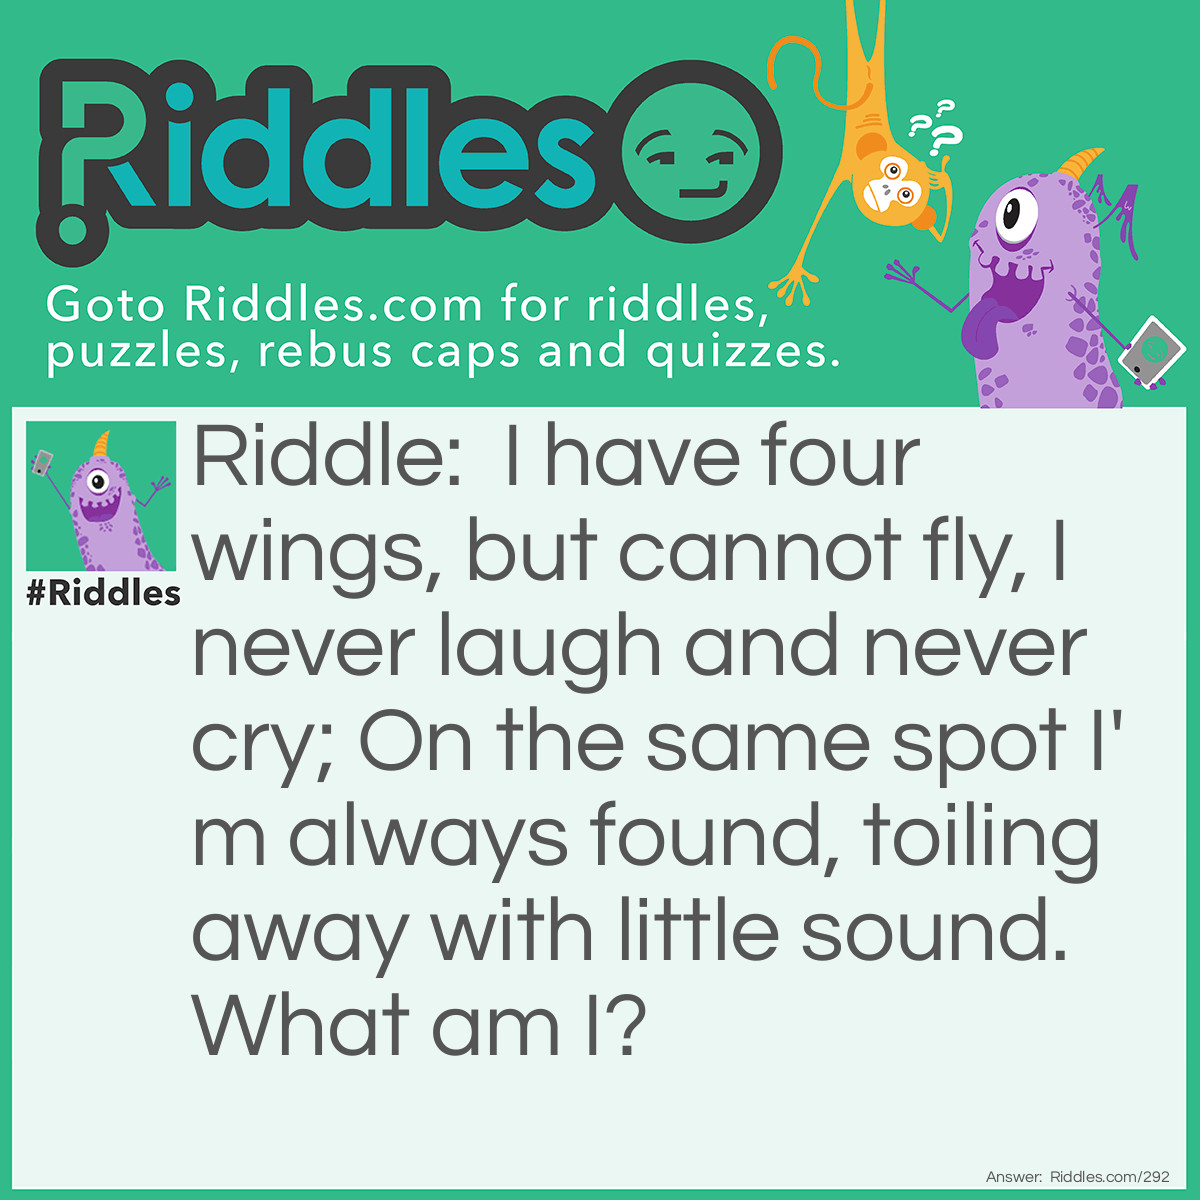 Riddle: I have four wings, but cannot fly, I never laugh and never cry; On the same spot, I'm always found, toiling away with little sound. What am I? Answer: A Windmill.